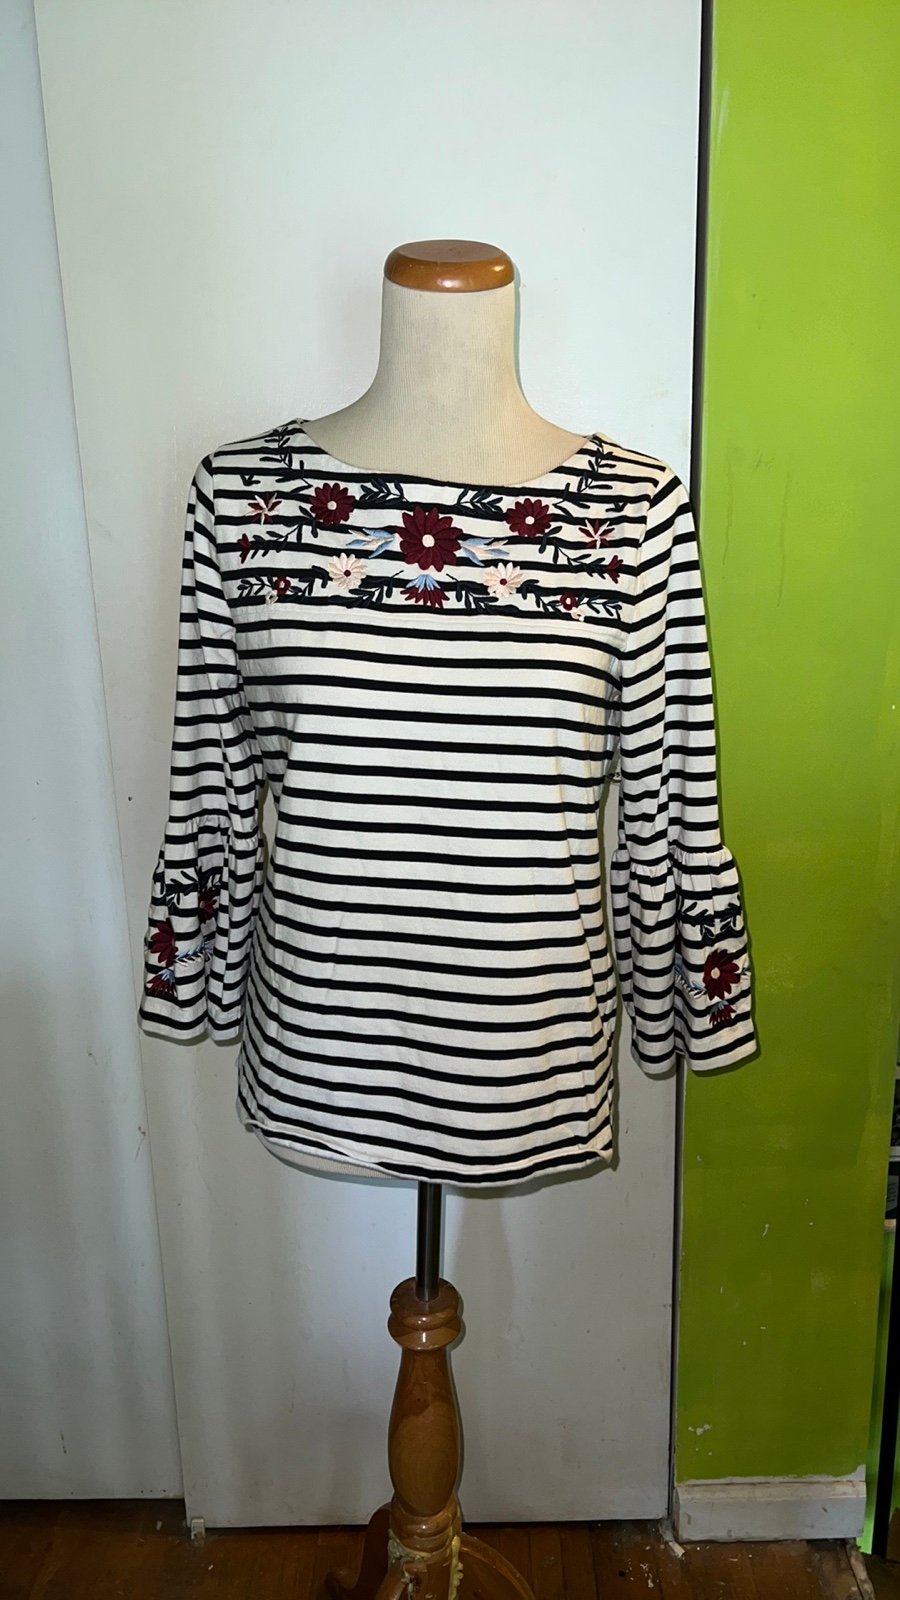 Simple J. Crew Med b&w Striped top with flowers HSO2lql